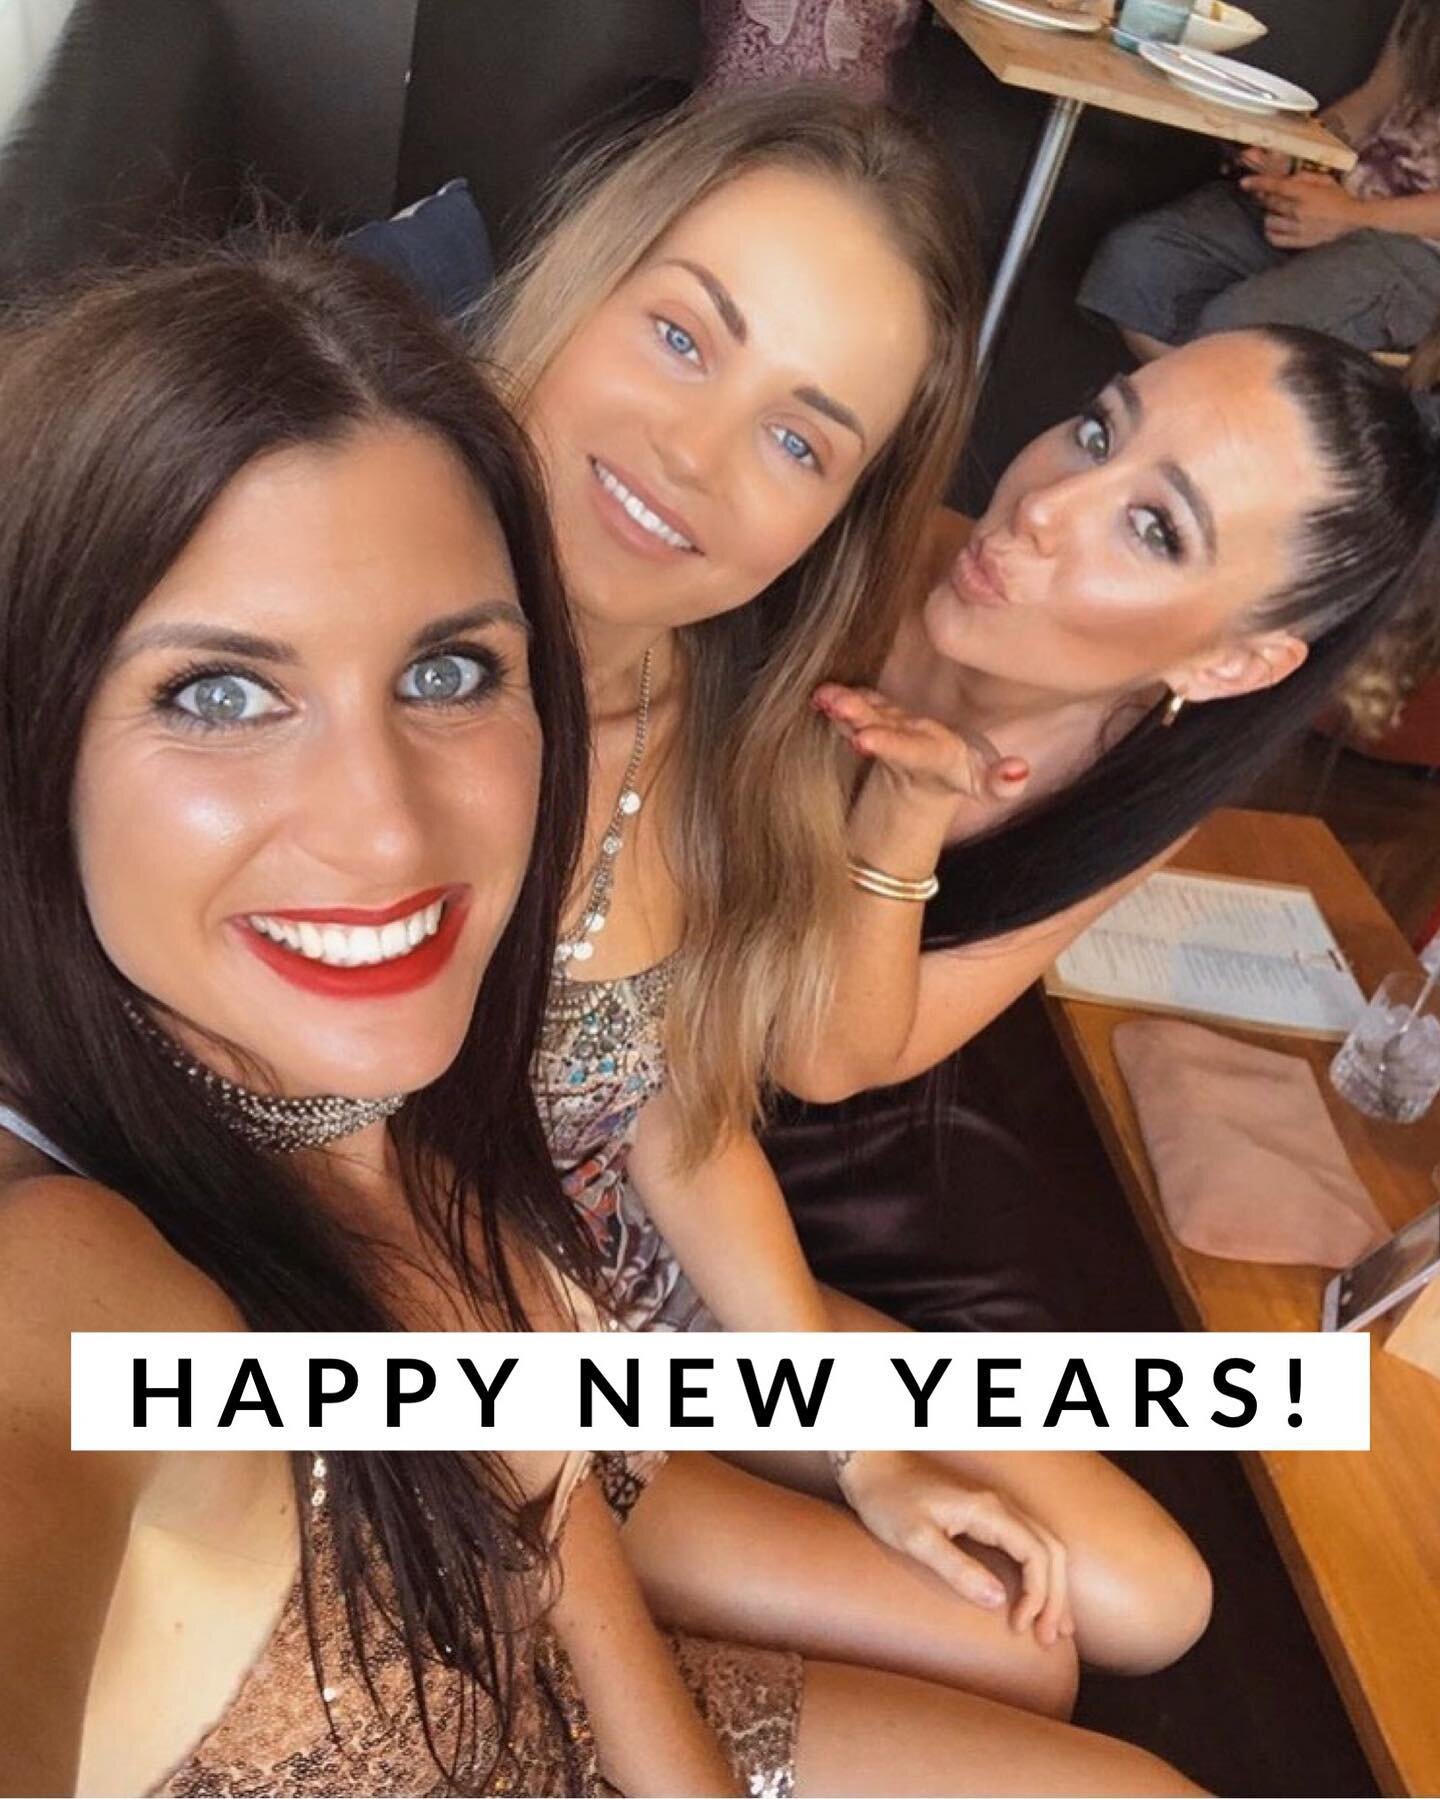 ✨Happy New Years!! ✨🥂🎉💜.
.
Hope you all aren&rsquo;t as hungover as I am from seeing in 2020. .
.
May there be love, laughter &amp; good times ahead. .
.
2019 taught us a lot of lessons. Now it&rsquo;s time to  receive the rewards in 2020 for all 